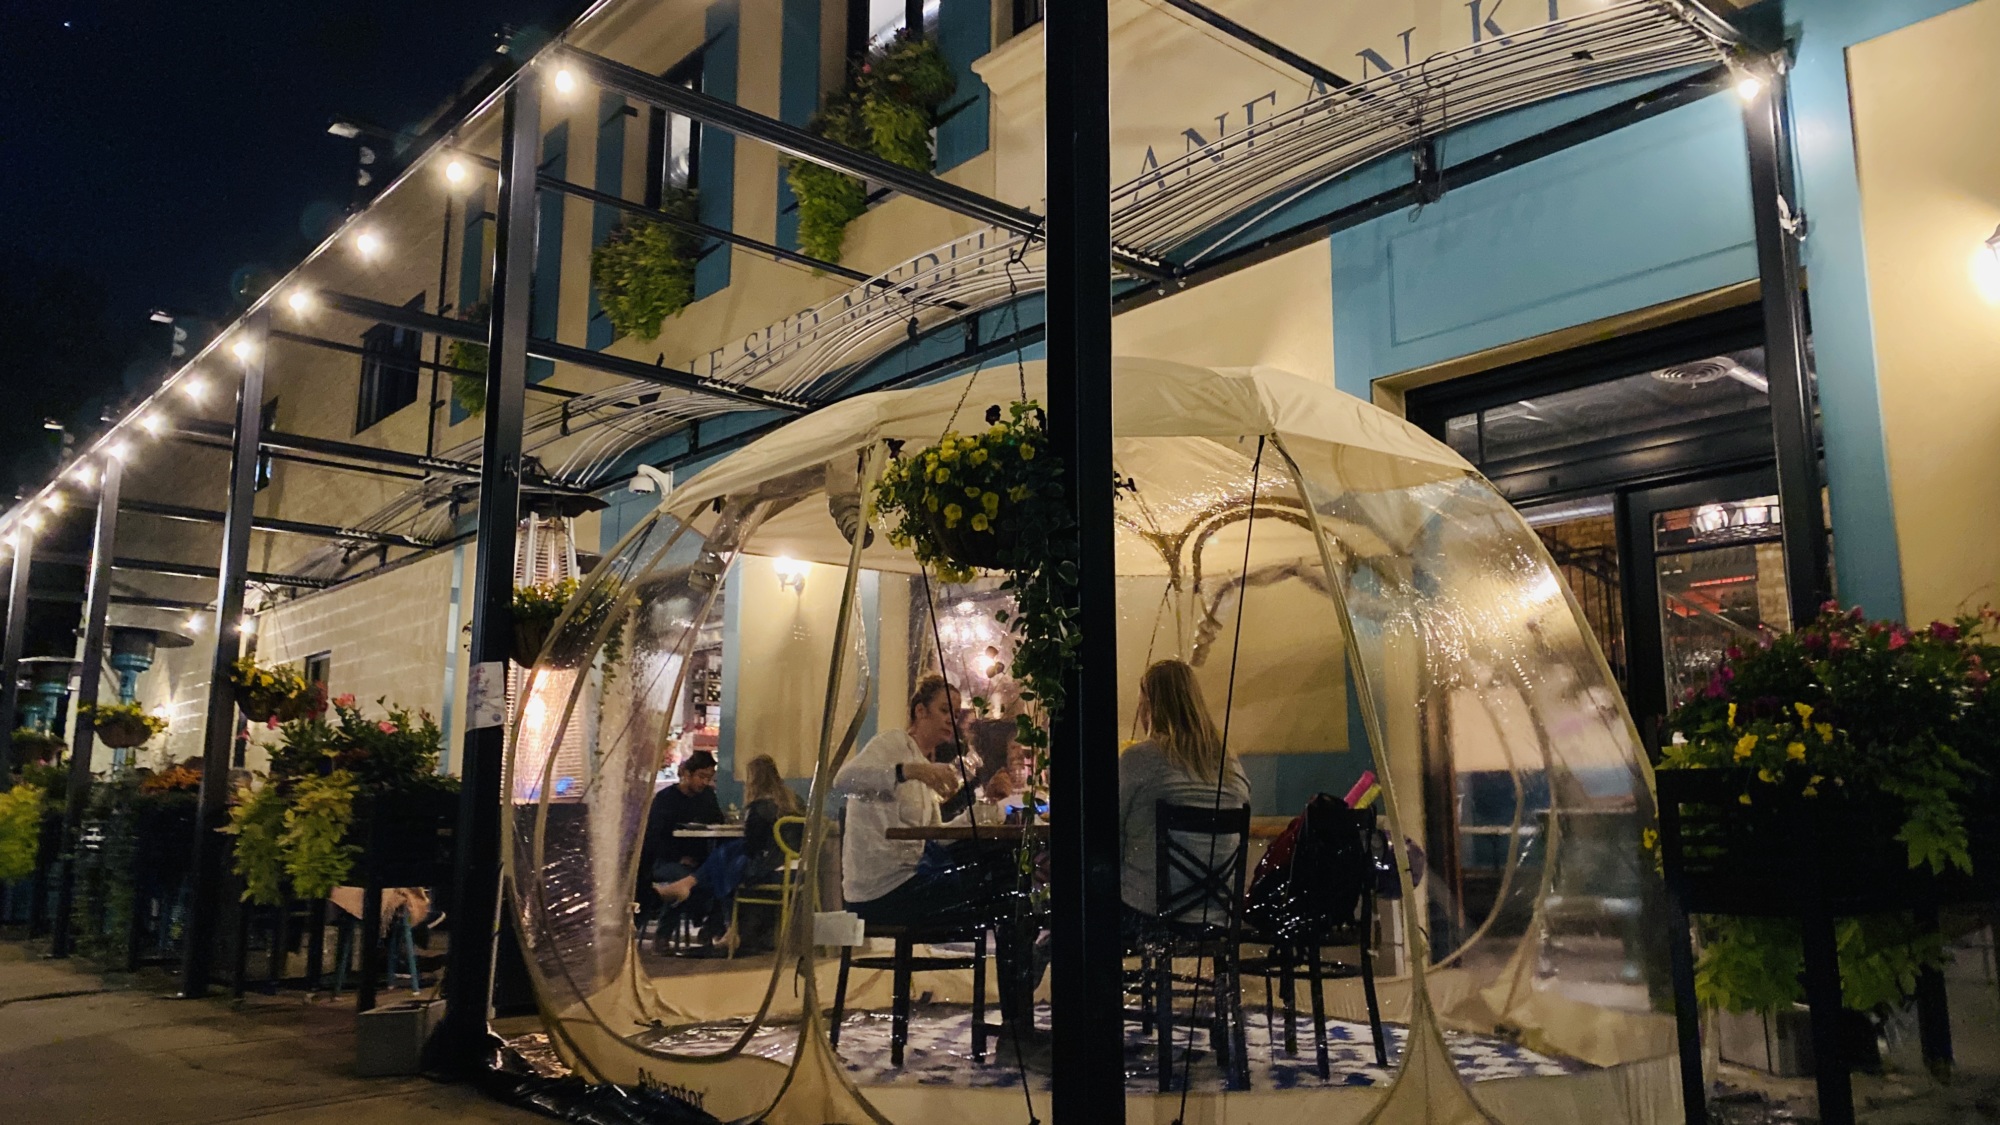 Domes await at Le Sud.